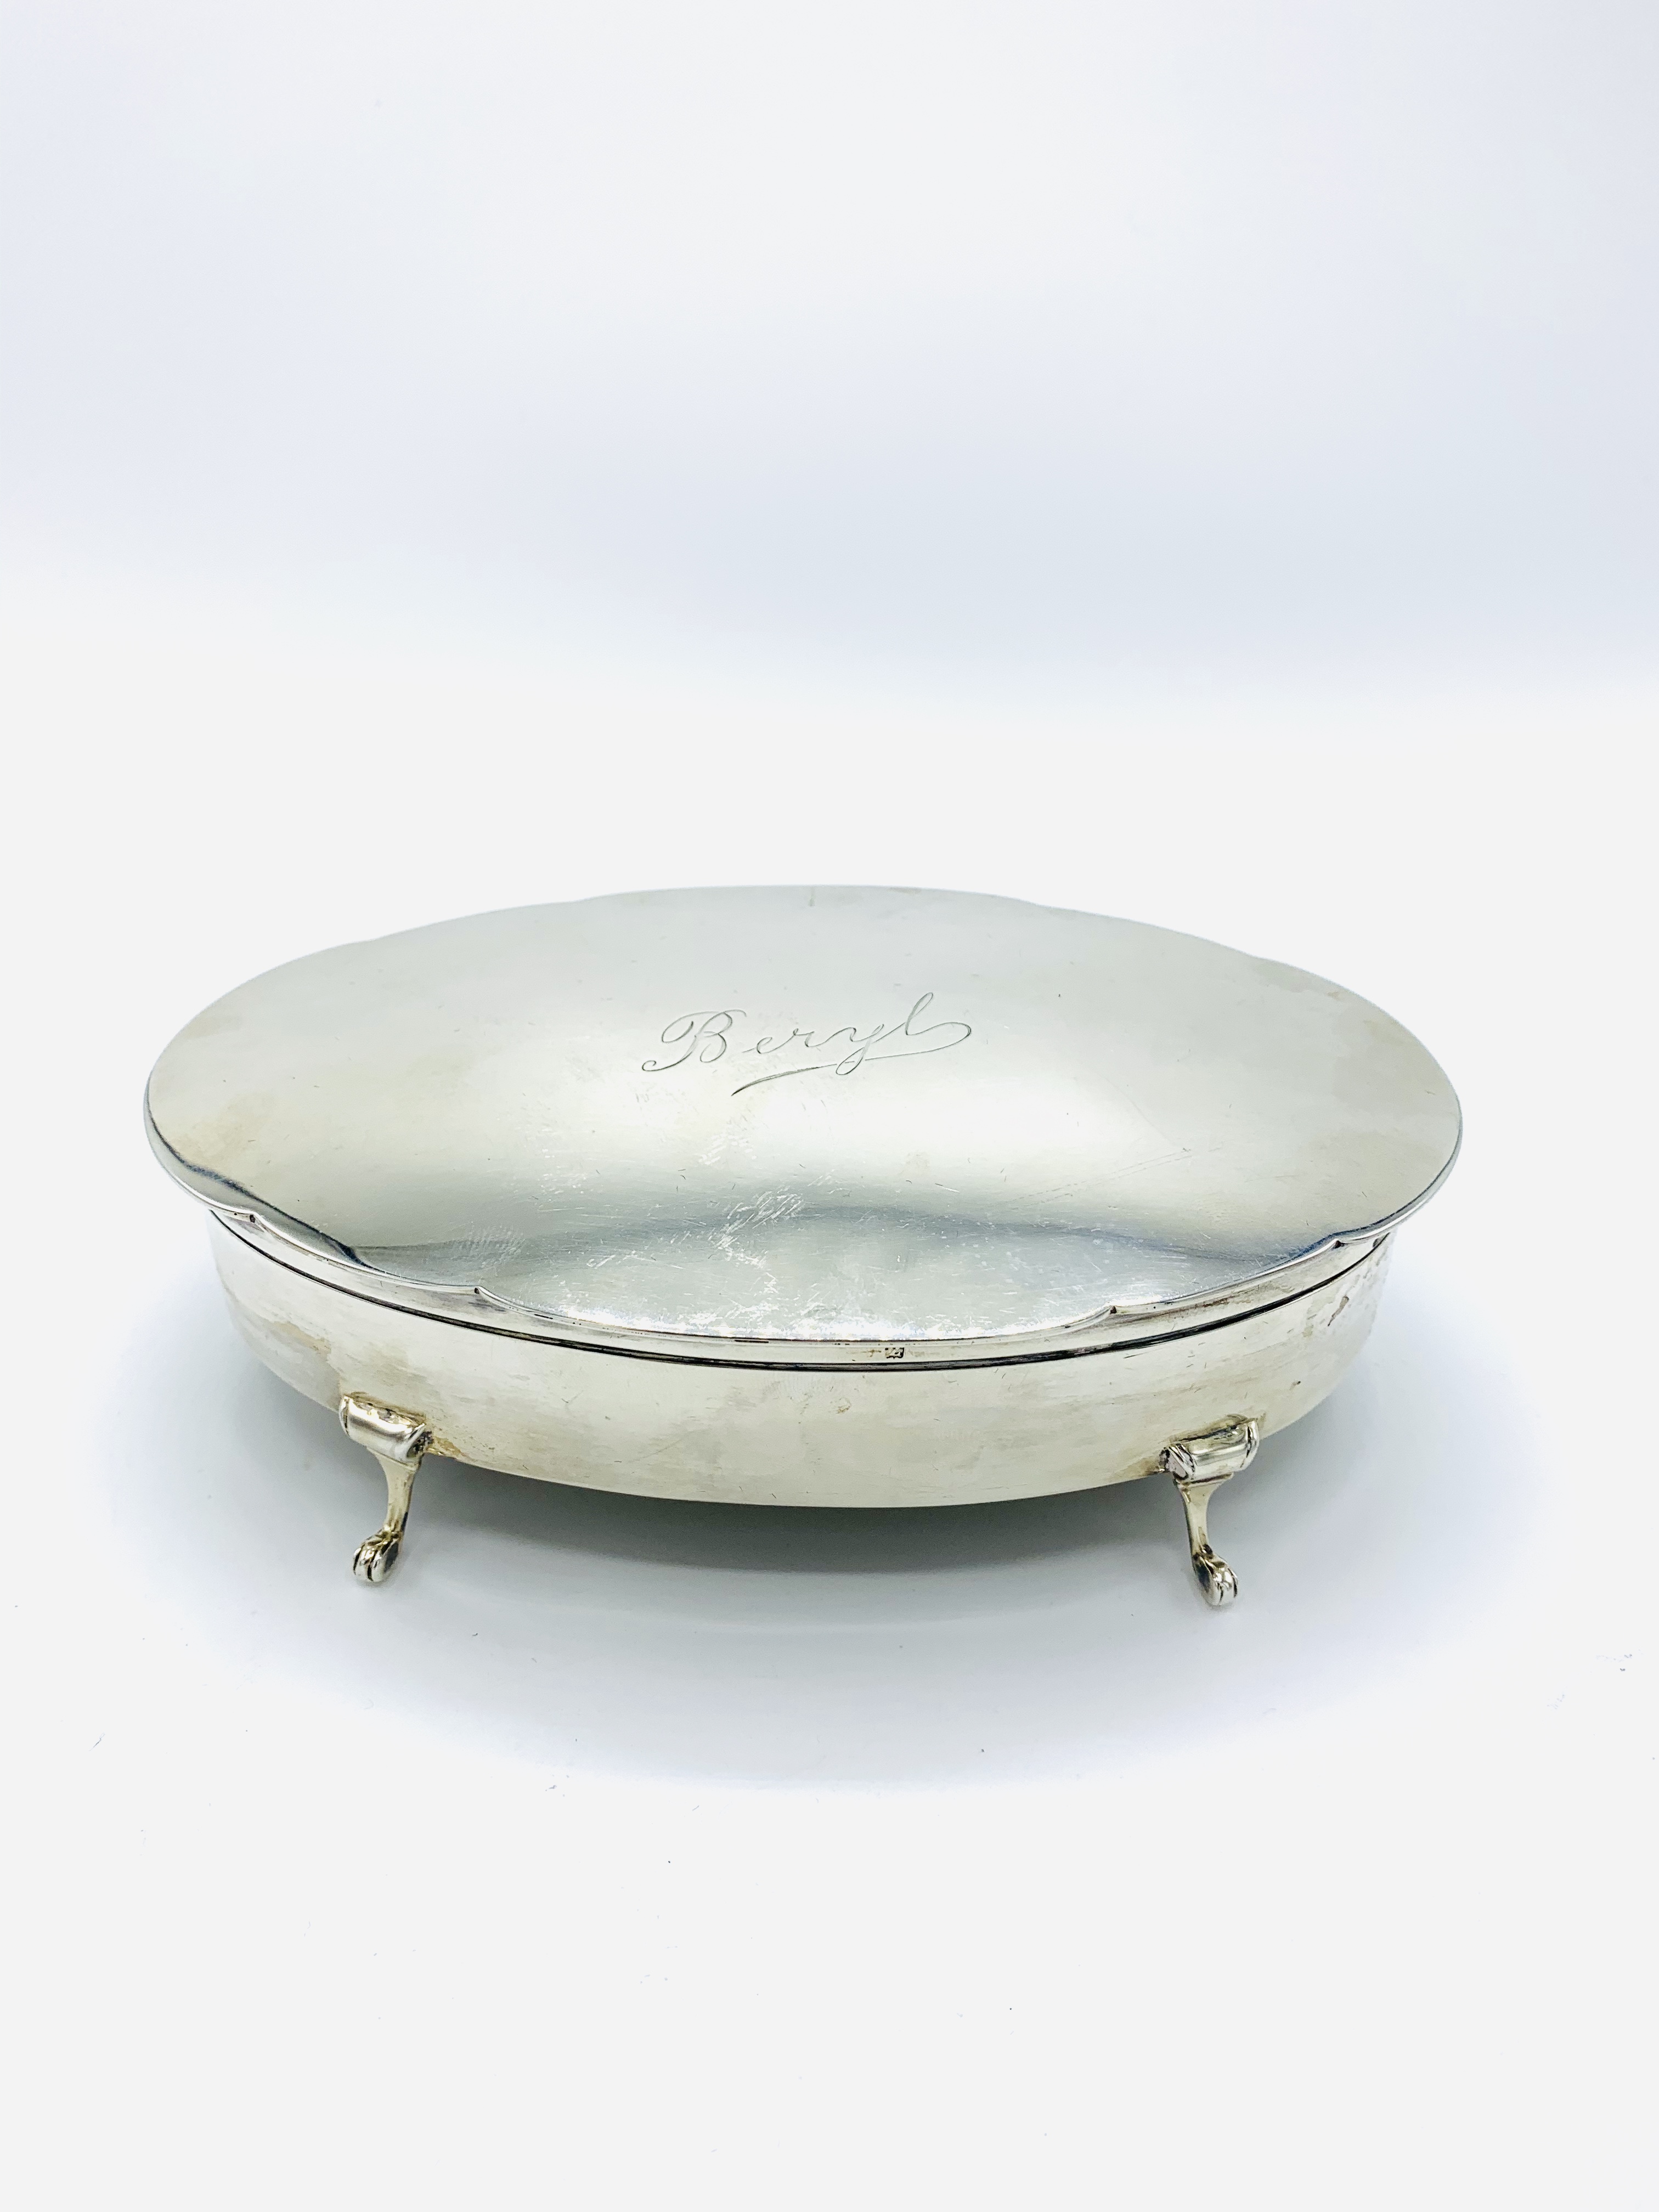 Lady's sterling silver dressing table footed trinket box engraved 'Beryl'